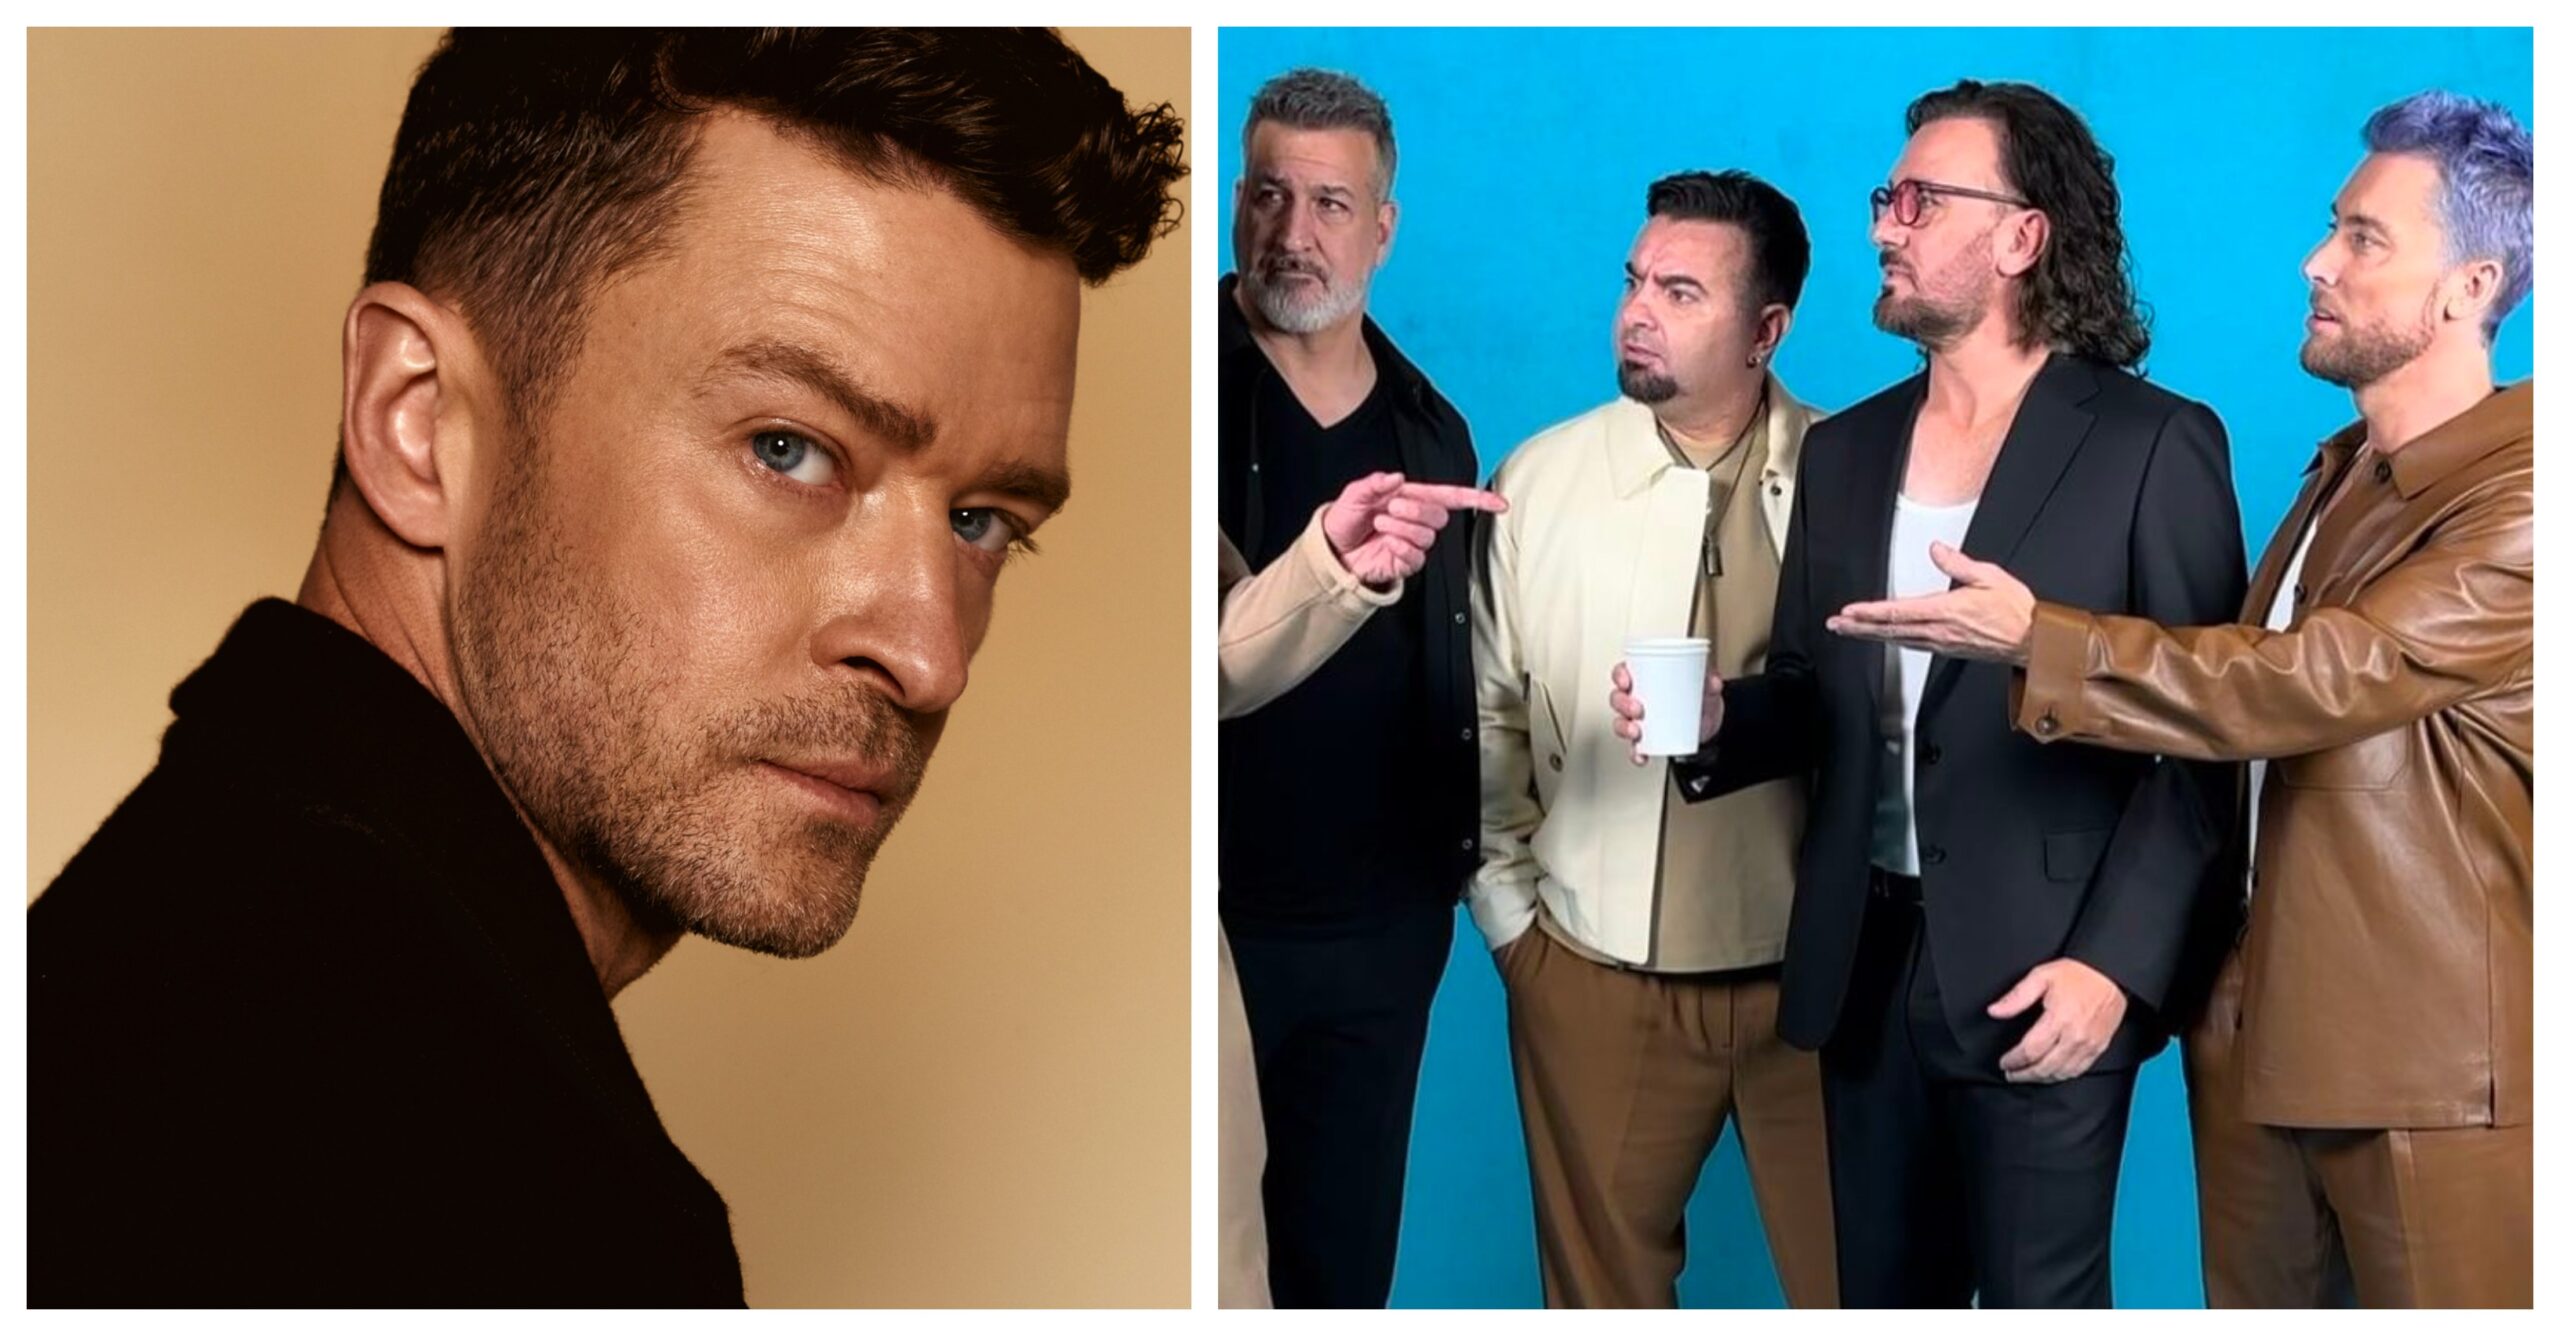 Label Source Says NO New NSYNC Album is in the Works, Despite Justin Timberlake Announcement